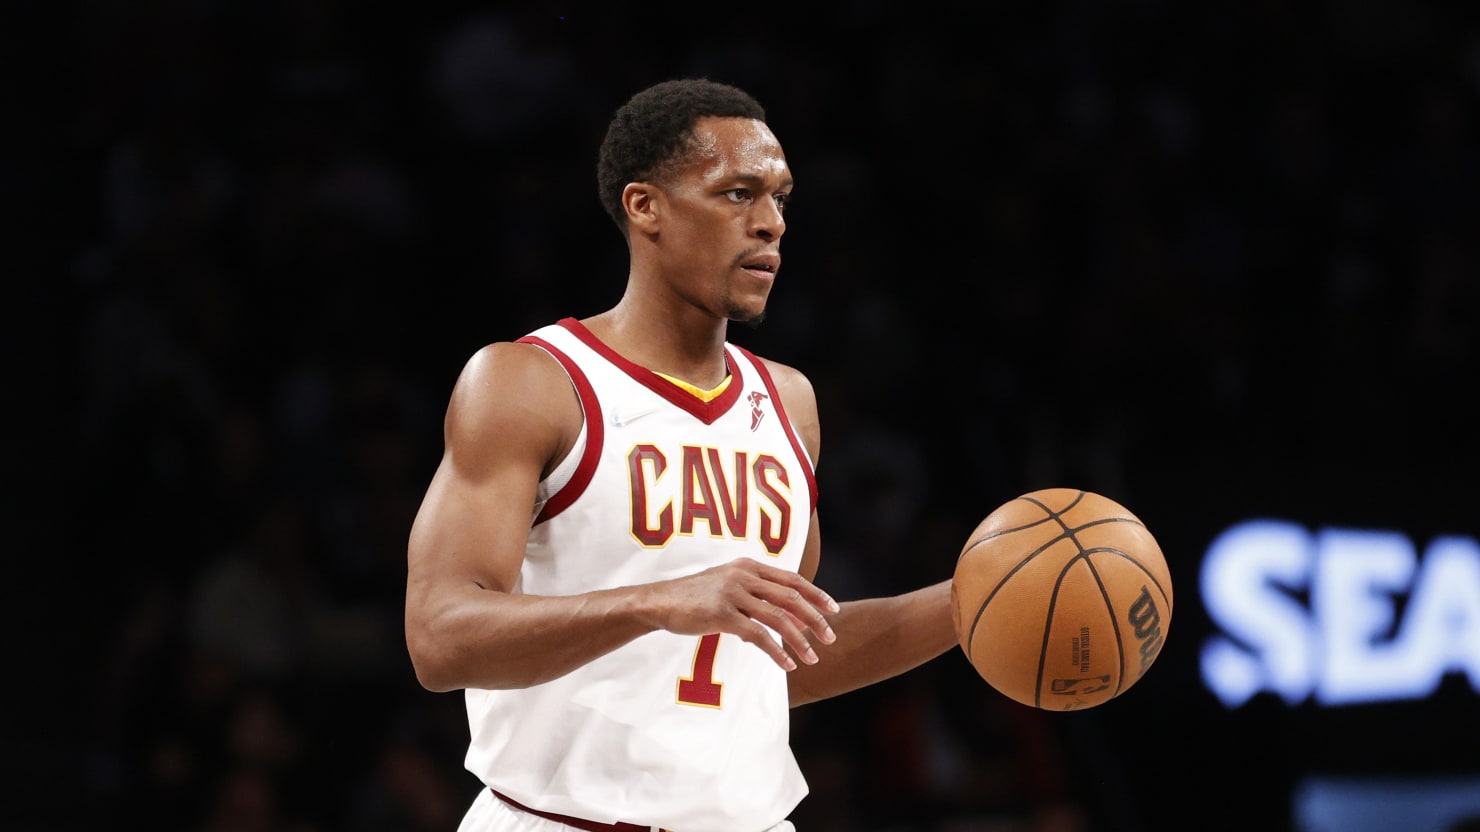 Rajon Rondo Comes In at No. 3 As We Count Down the Top 10 Players